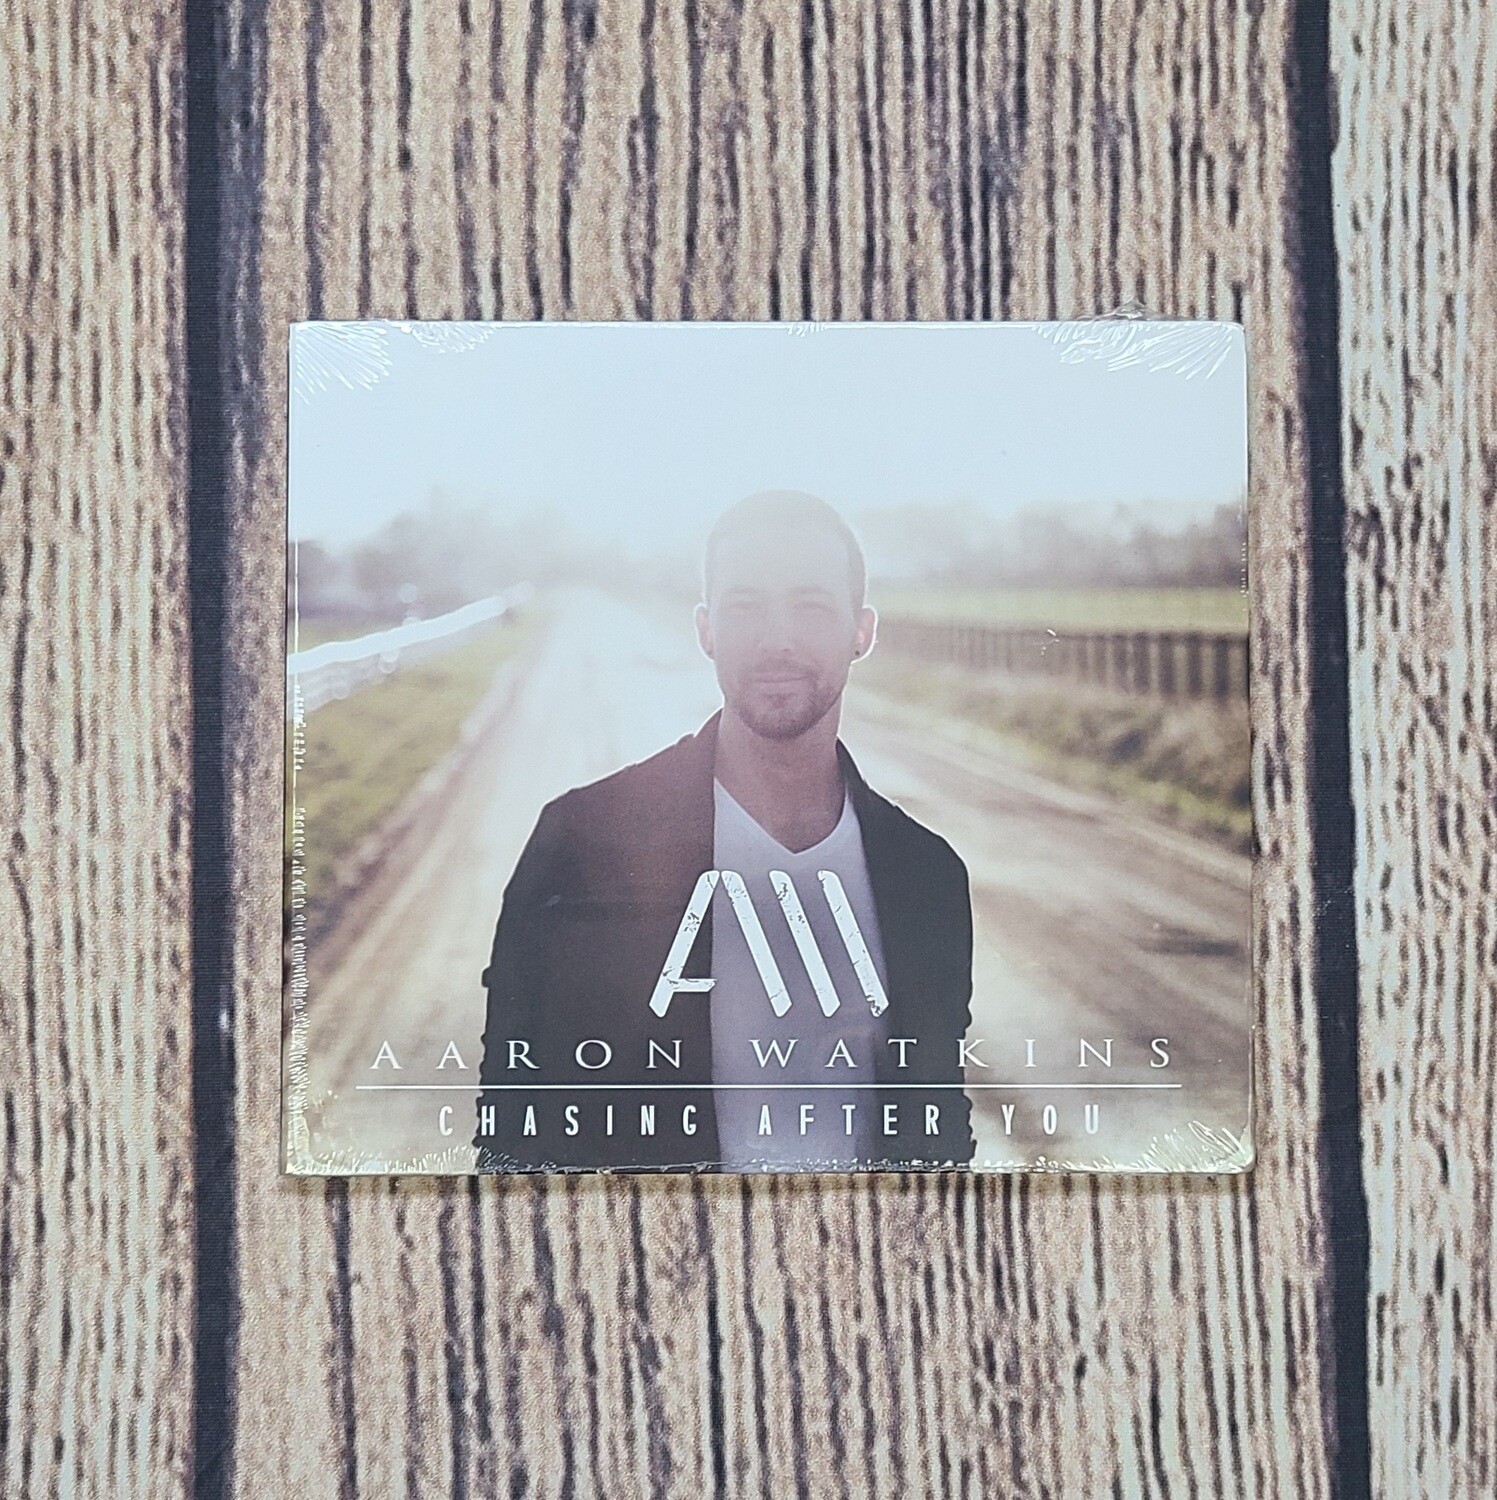 Chasing After You by Aaron Watkins CD